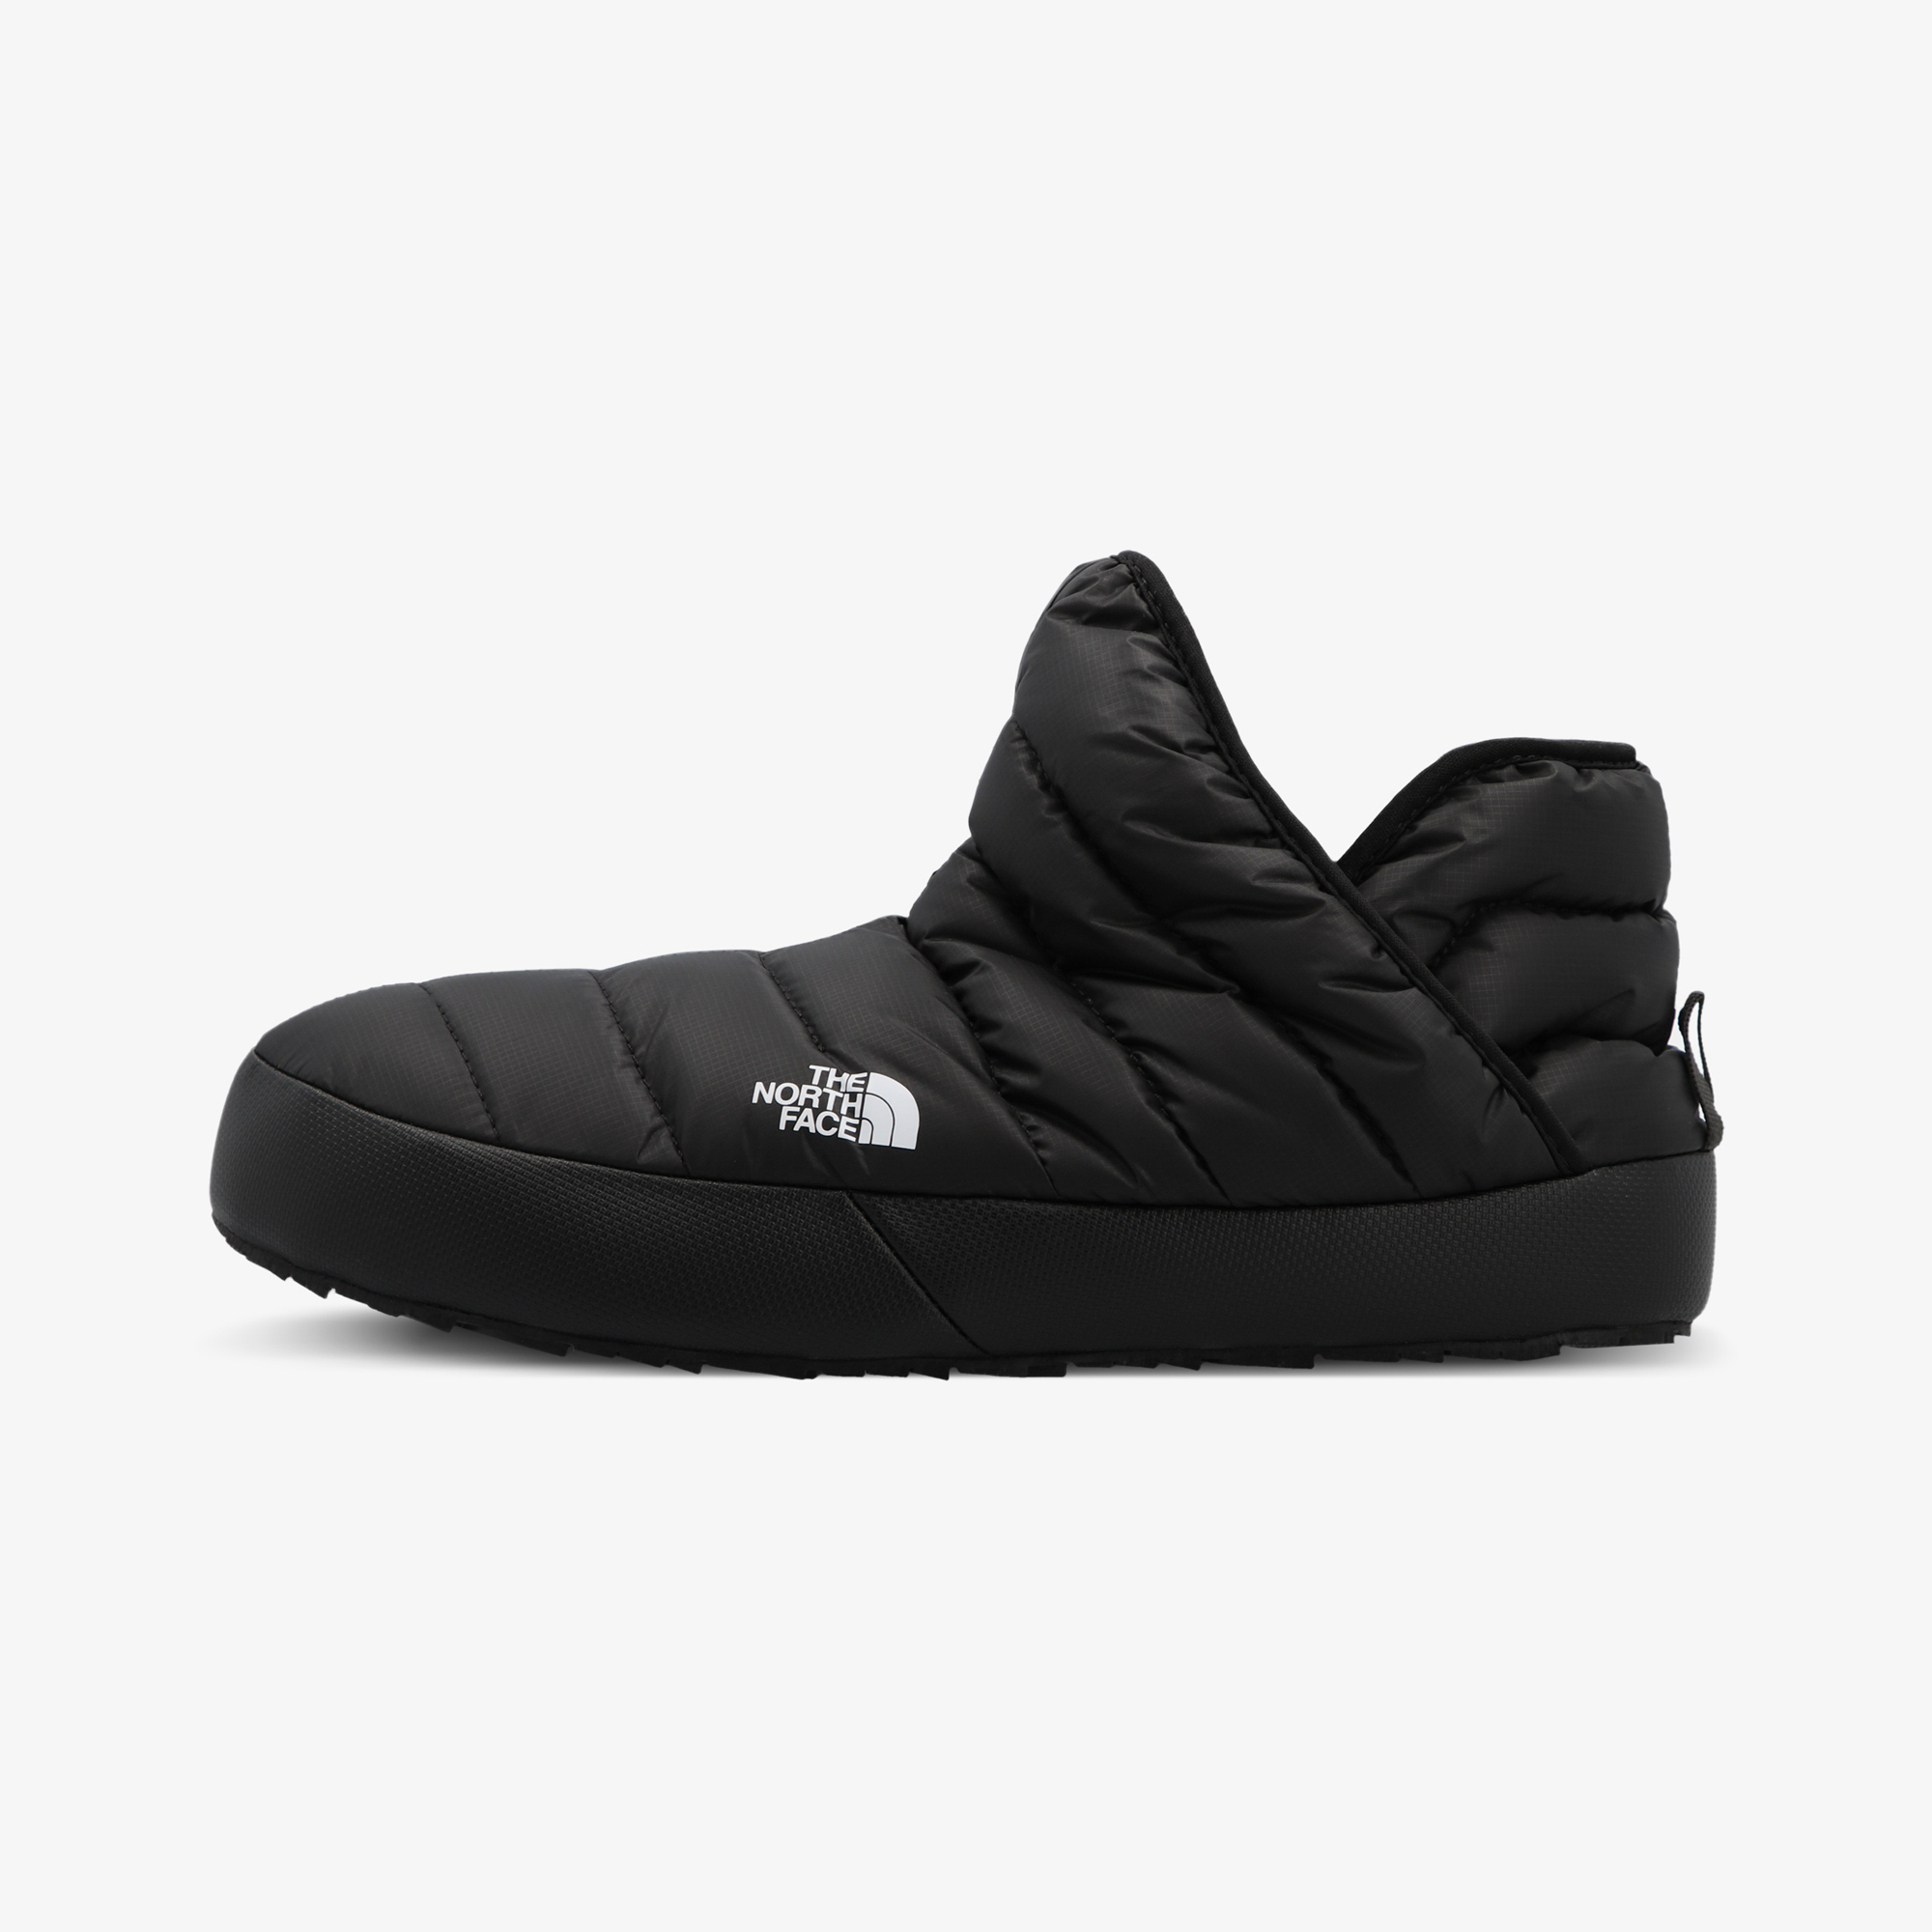 Ботинки The North Face The North Face Thermoball Traction Bootie NF0A3MKHT1K-KY4, цвет черный, размер 44.5